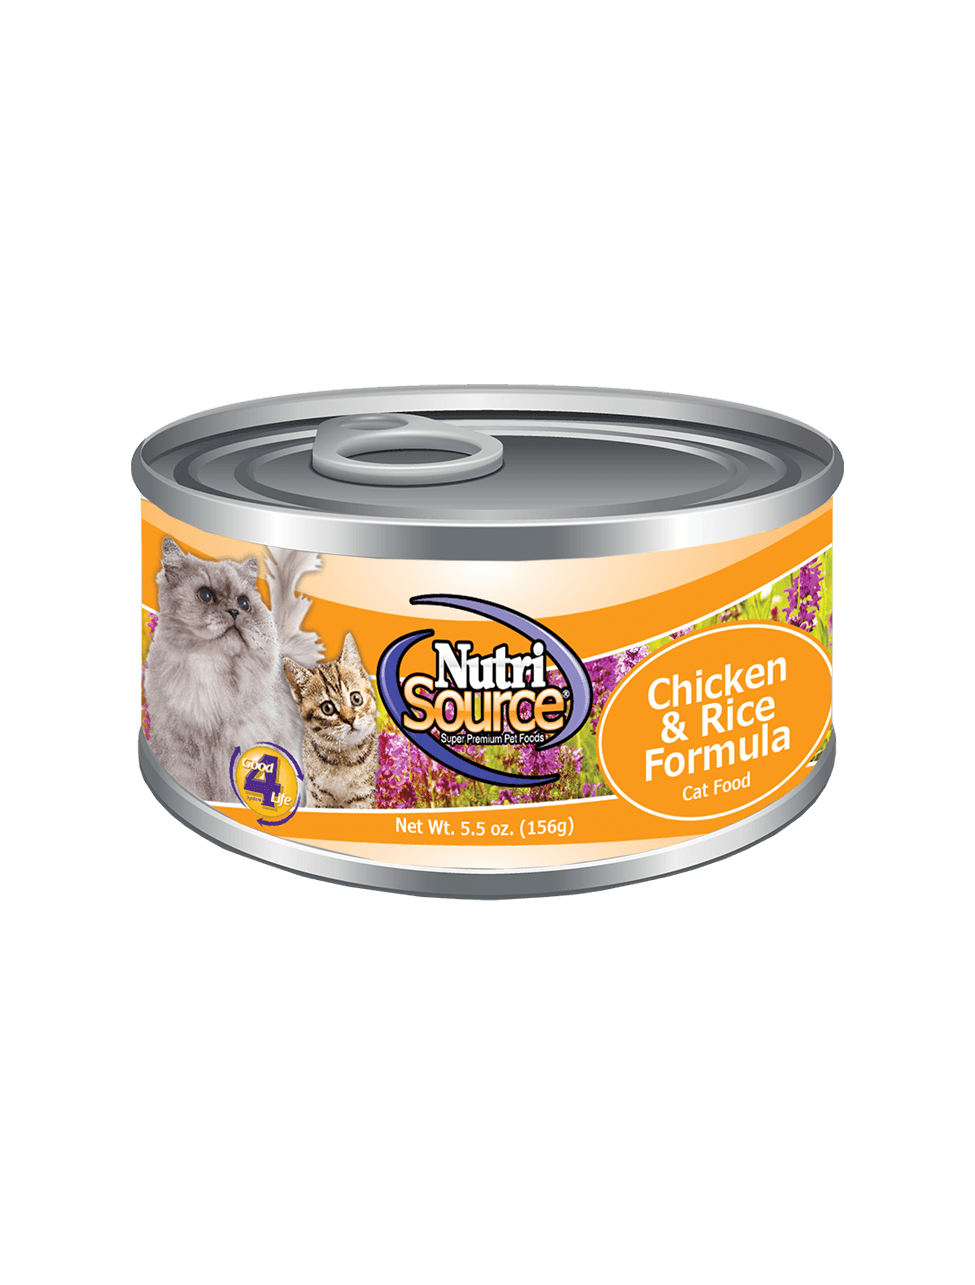 Chicken & Rice Cat Formula - can